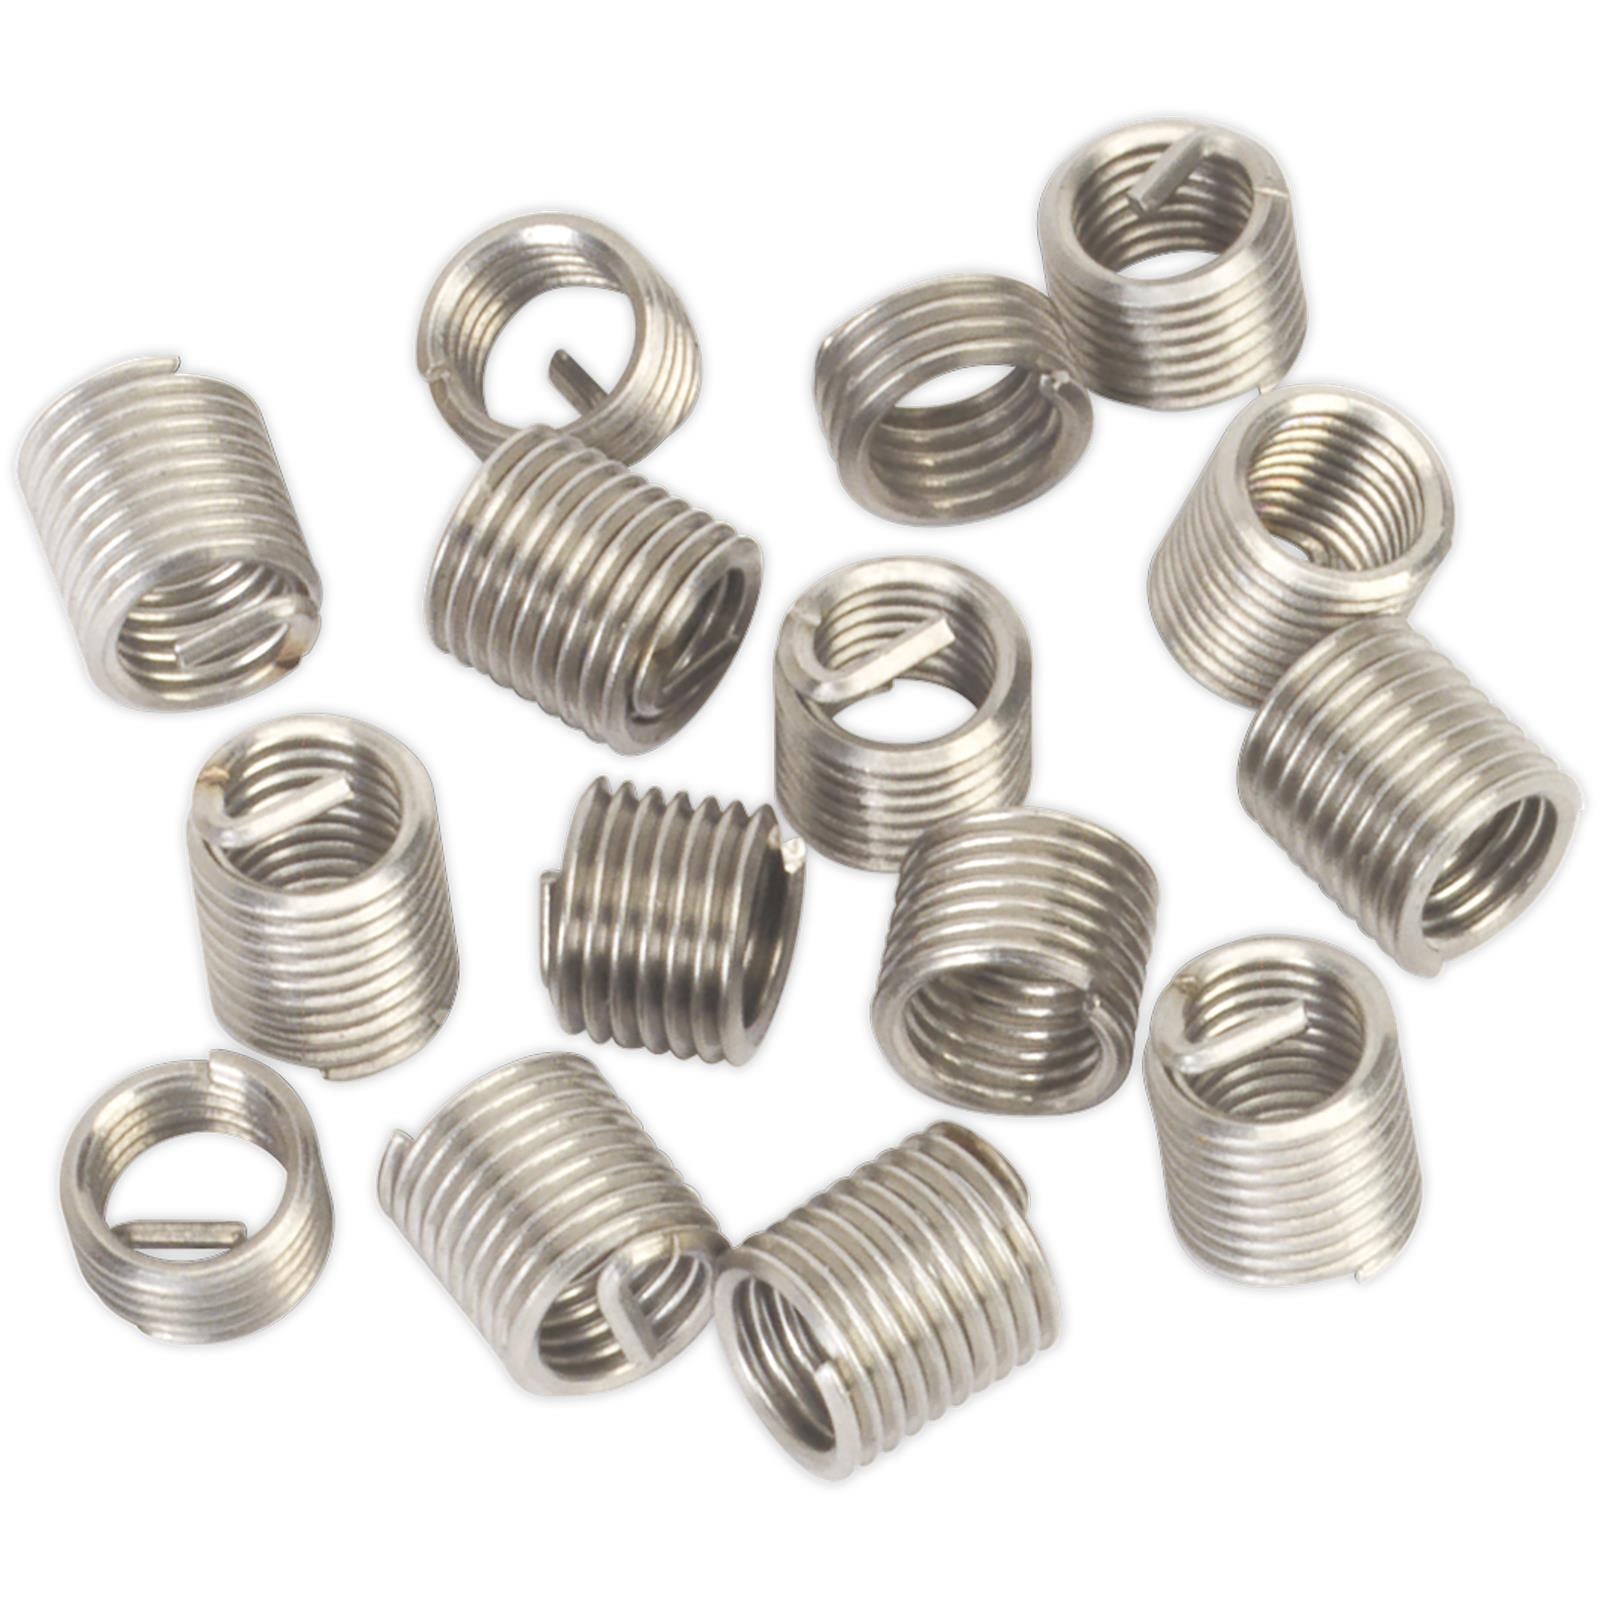 Sealey Thread Insert M5 x 0.8mm for TRM5 Threaded Inserts Helicoil 15 Pack